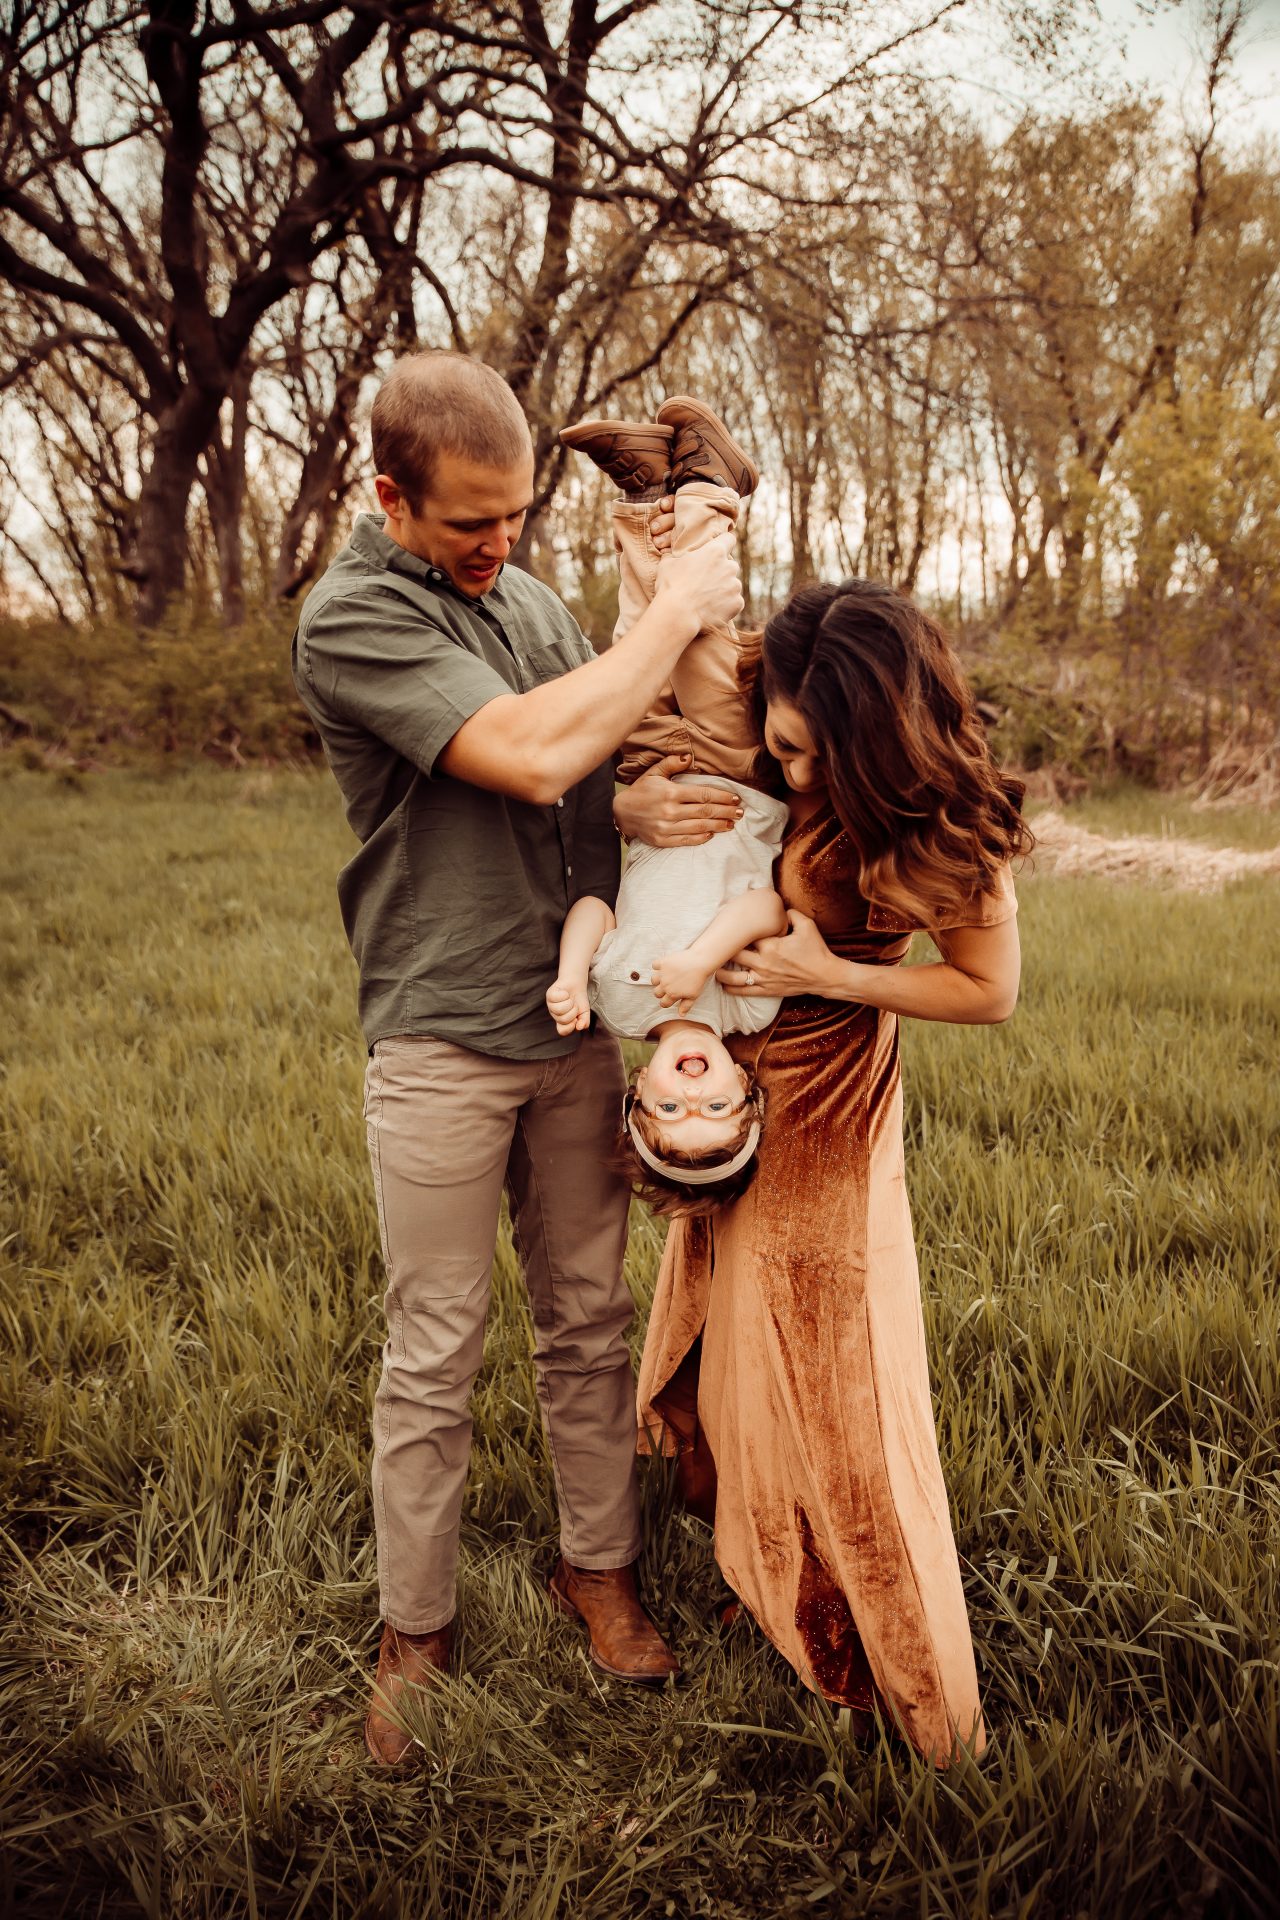 A joyful moment in a grassy field as a couple plays with their little one, raising a deaf child with love and inclusion, holding the child upside down, with laughter in the air.